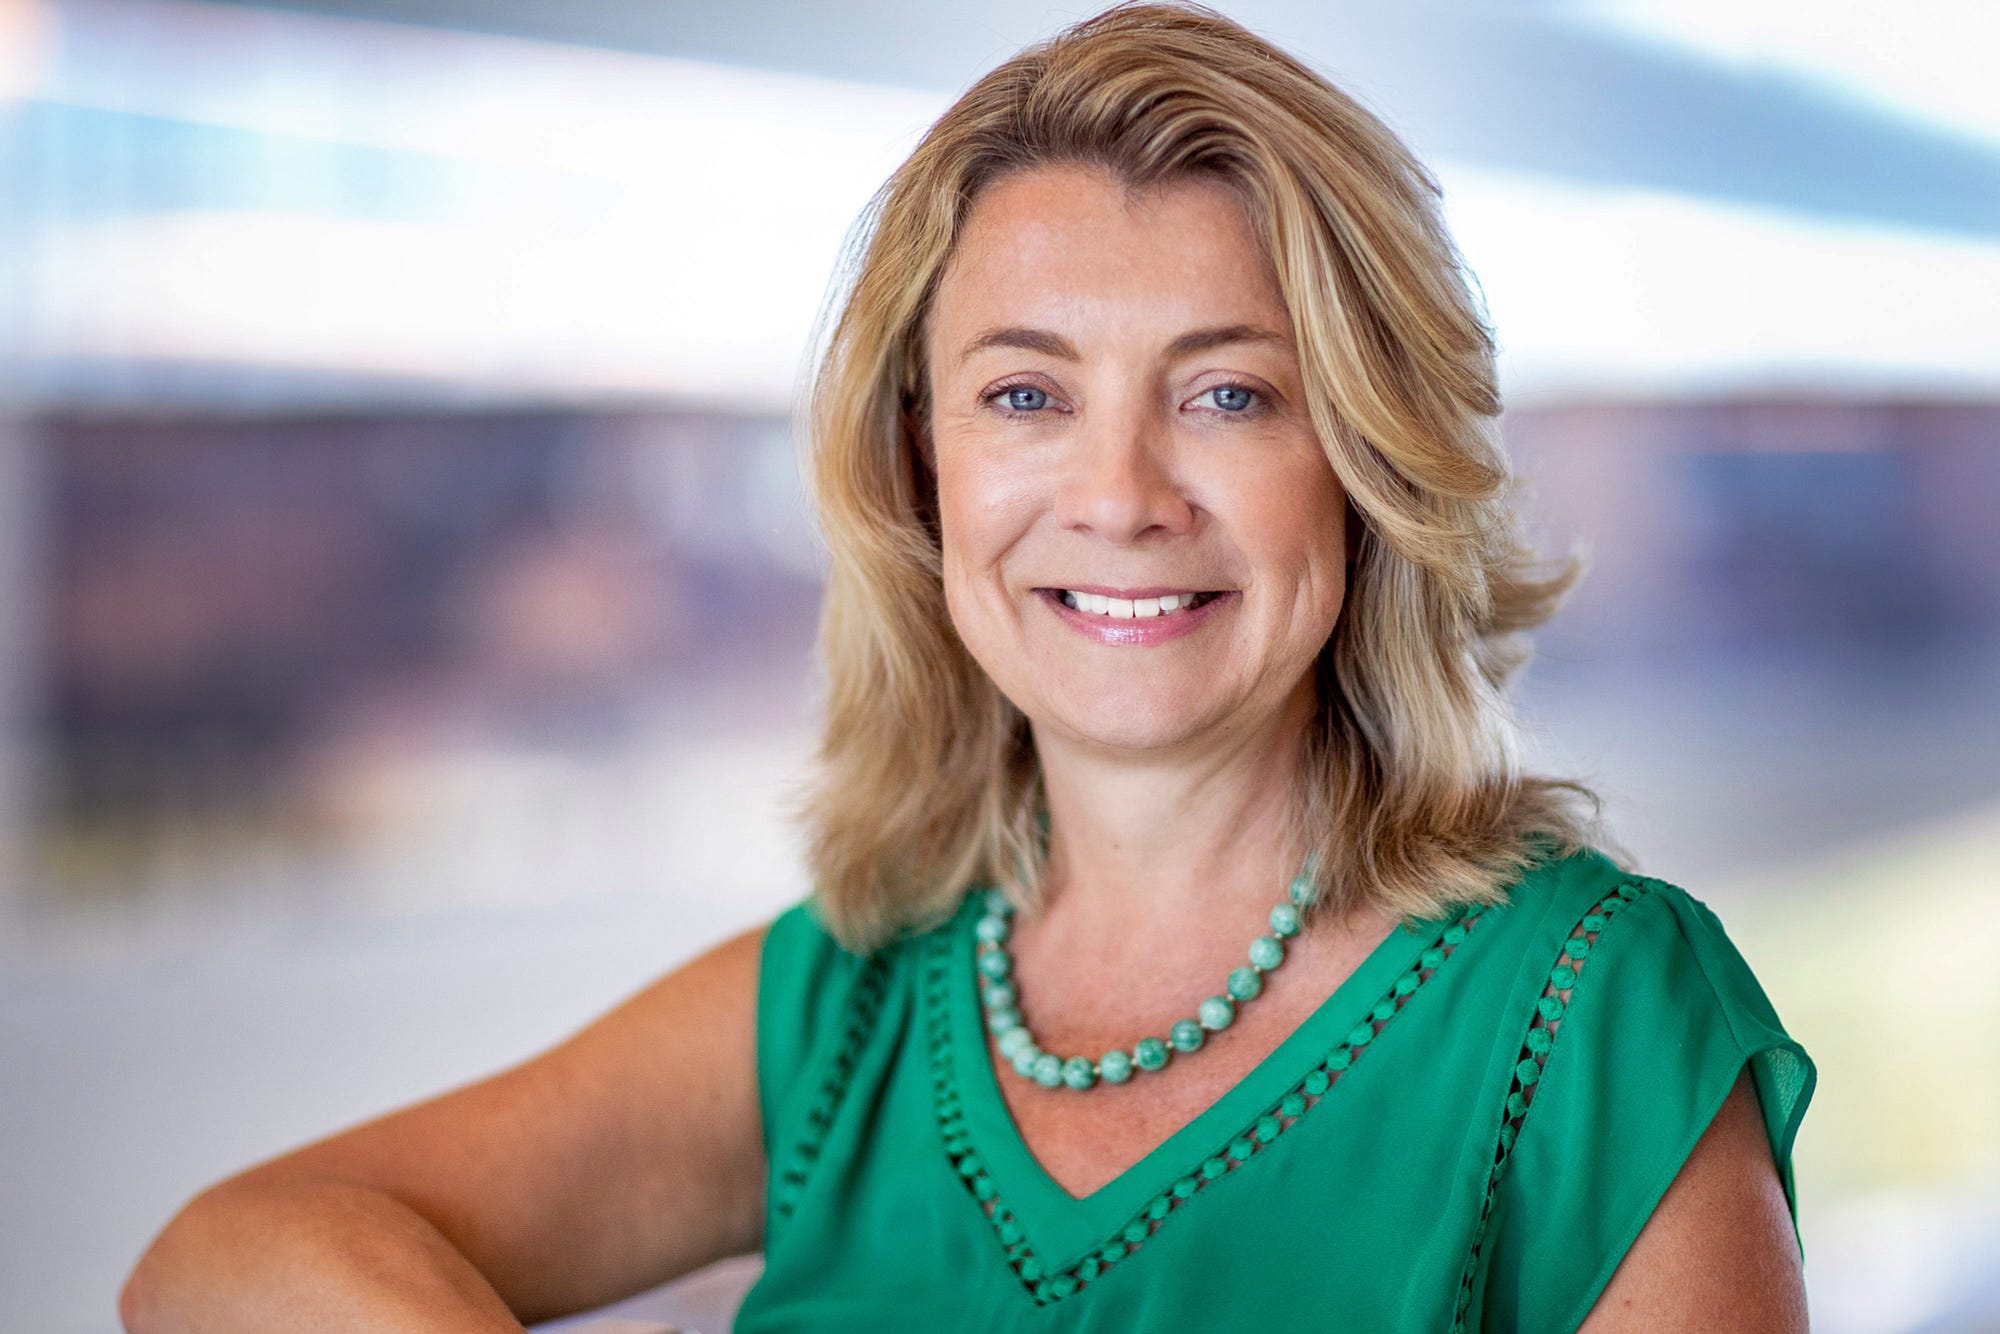 Women Of The C-Suite Bristol Myers Squibb SVP Catherine Owen On The Five Things You Need To Succeed As A Senior Executive by Candice Georgiadis Authority Magazine Medium image